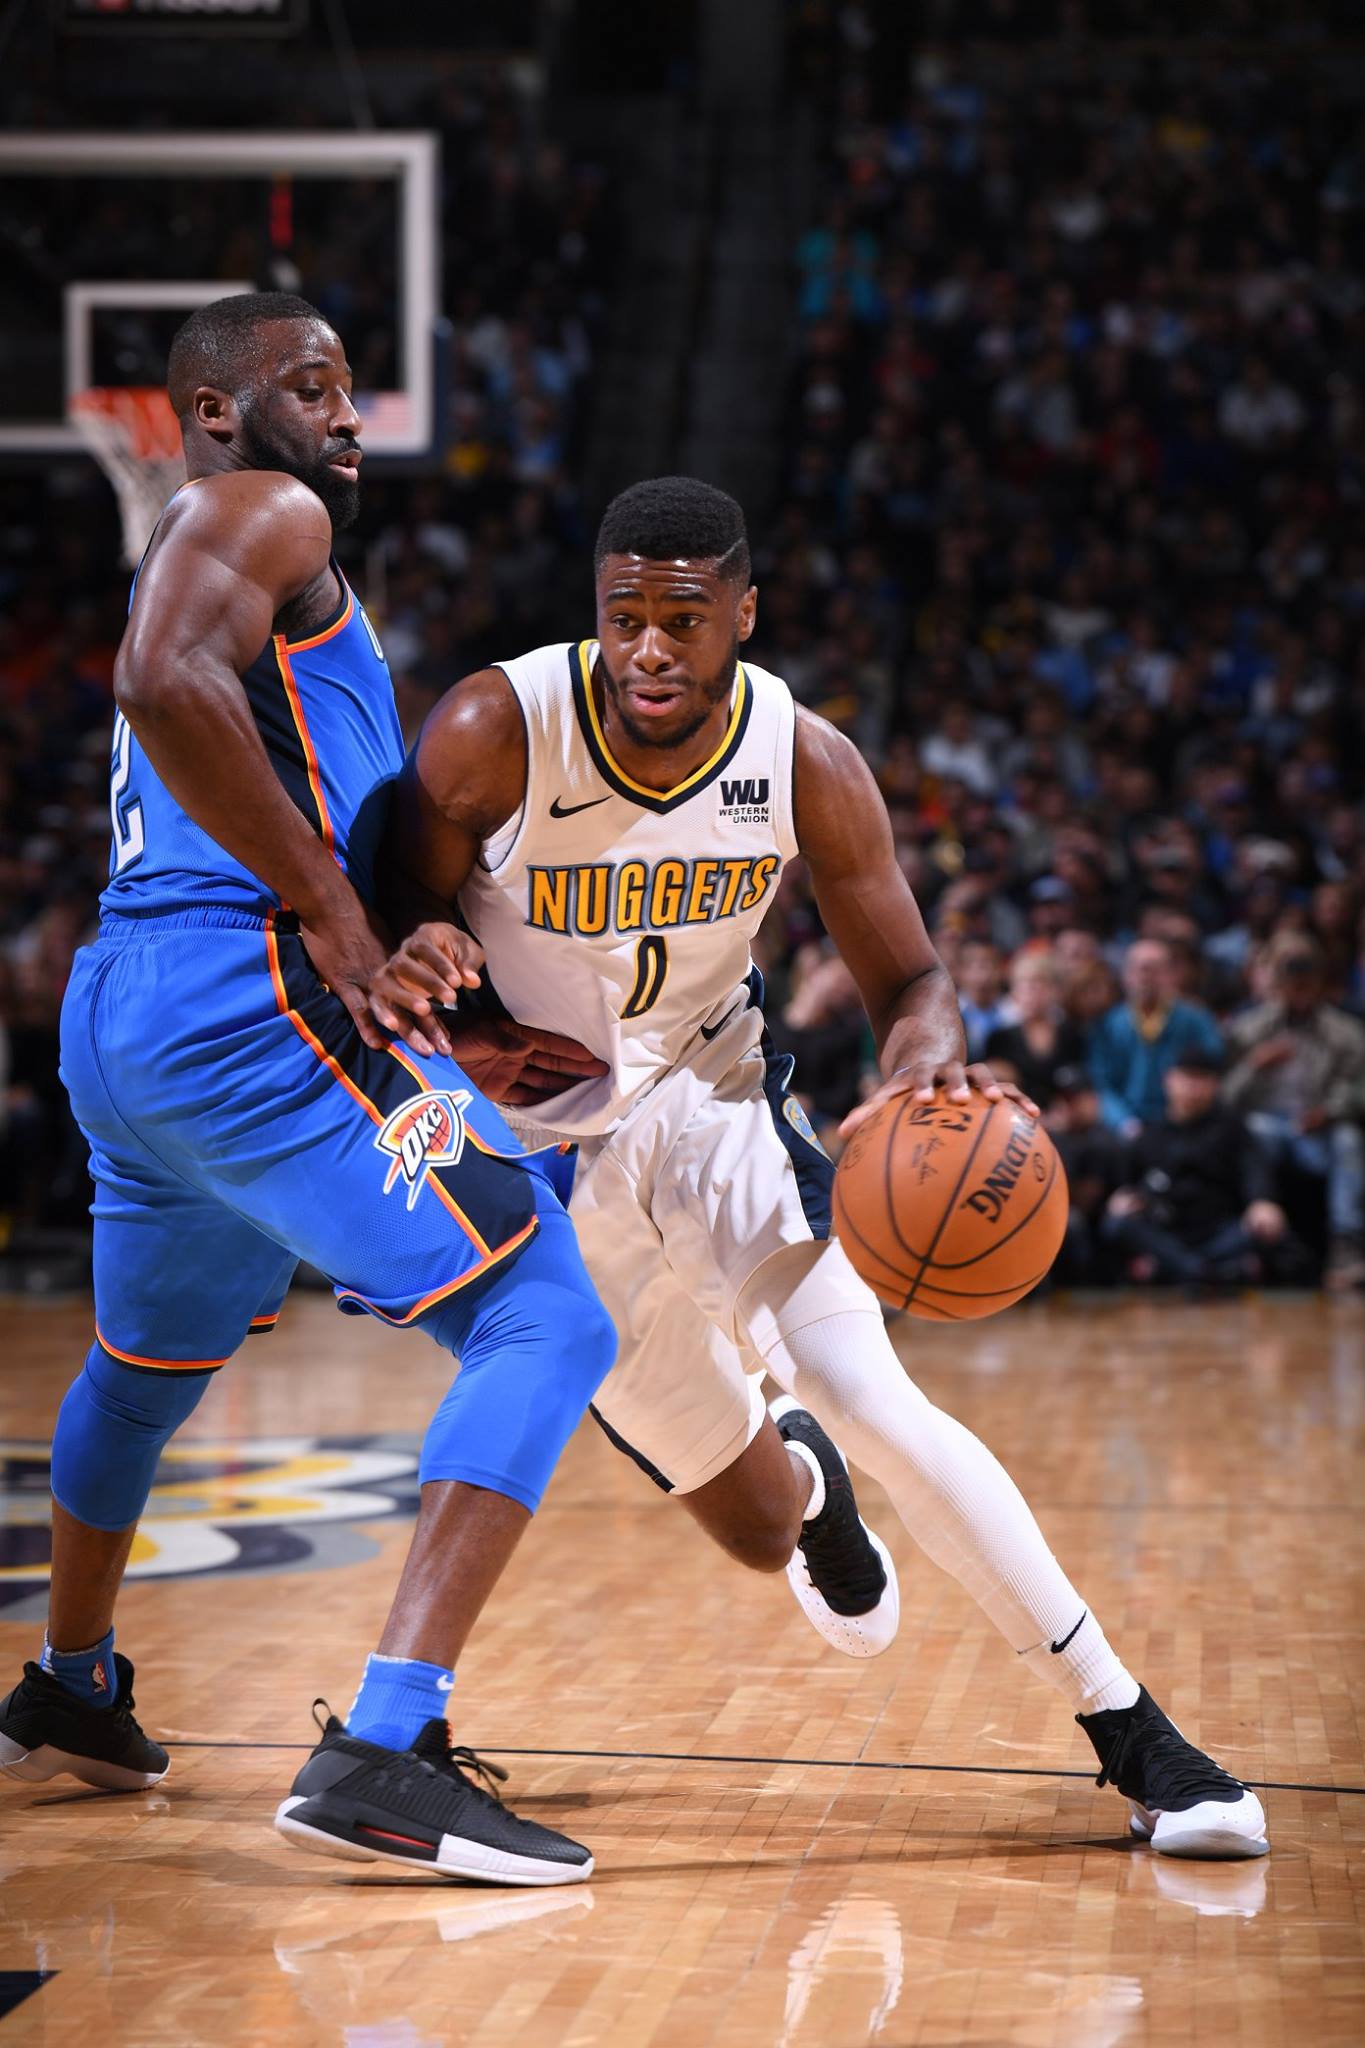 Nba Indonesia On Twitter Oklahoma City Thunder Vs Denver Nuggets Win 94 102 Carmelo Anthony Okc 28 Pts 5 Reb 1 Stl Emmanuel Mudiay Den 21 Pts 7 Reb 5 Ast Https T Co 7owsl9nabw